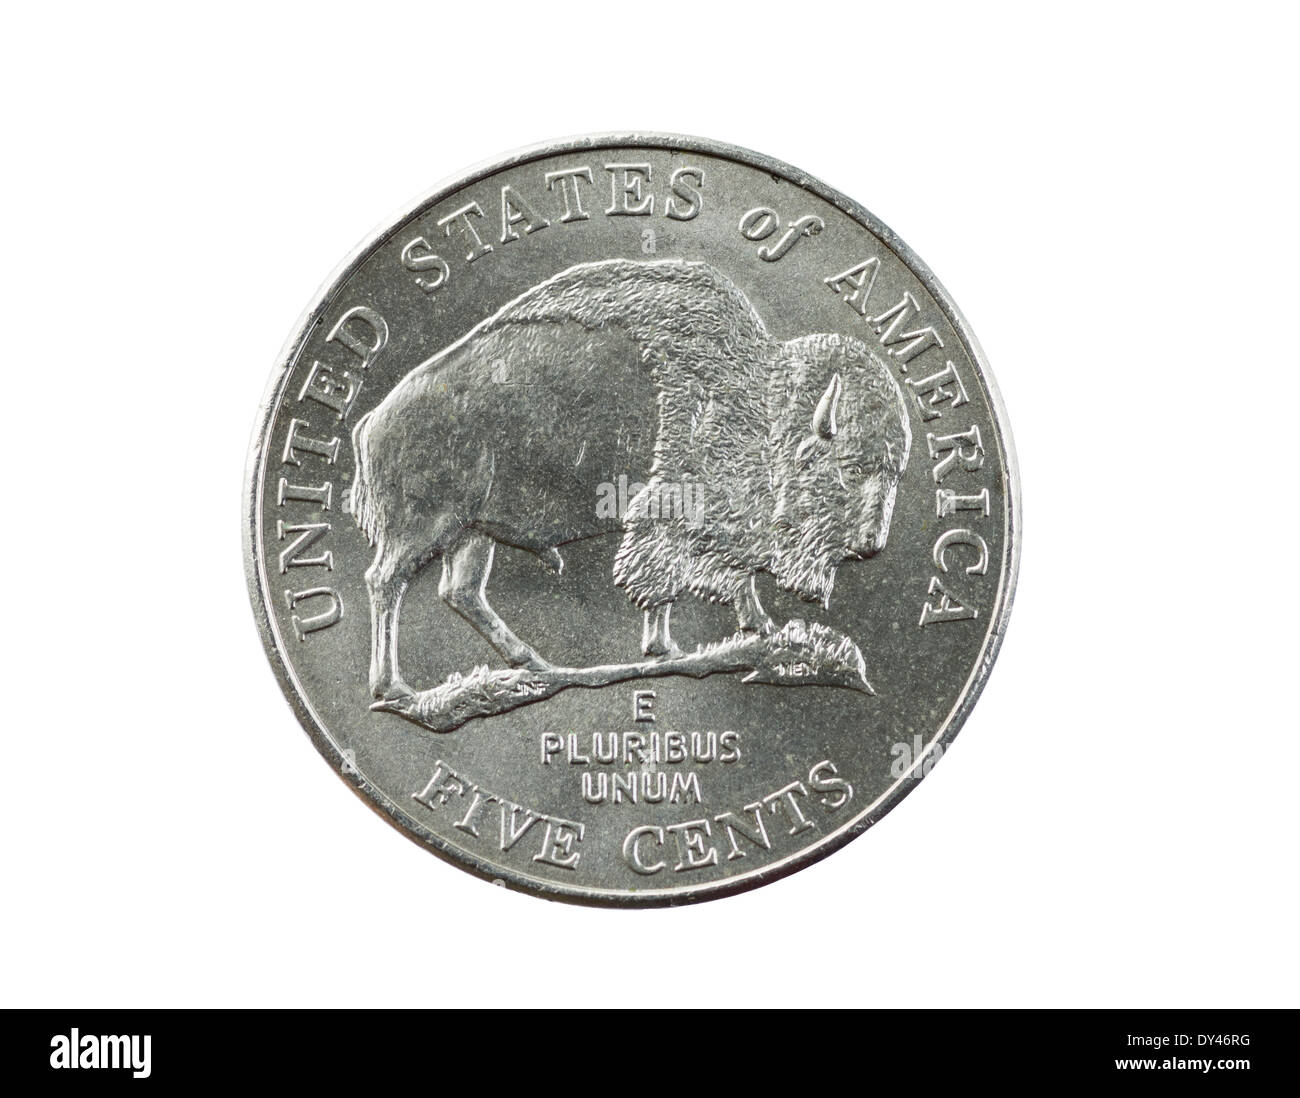 Nickel de bison coin isolated on white Banque D'Images